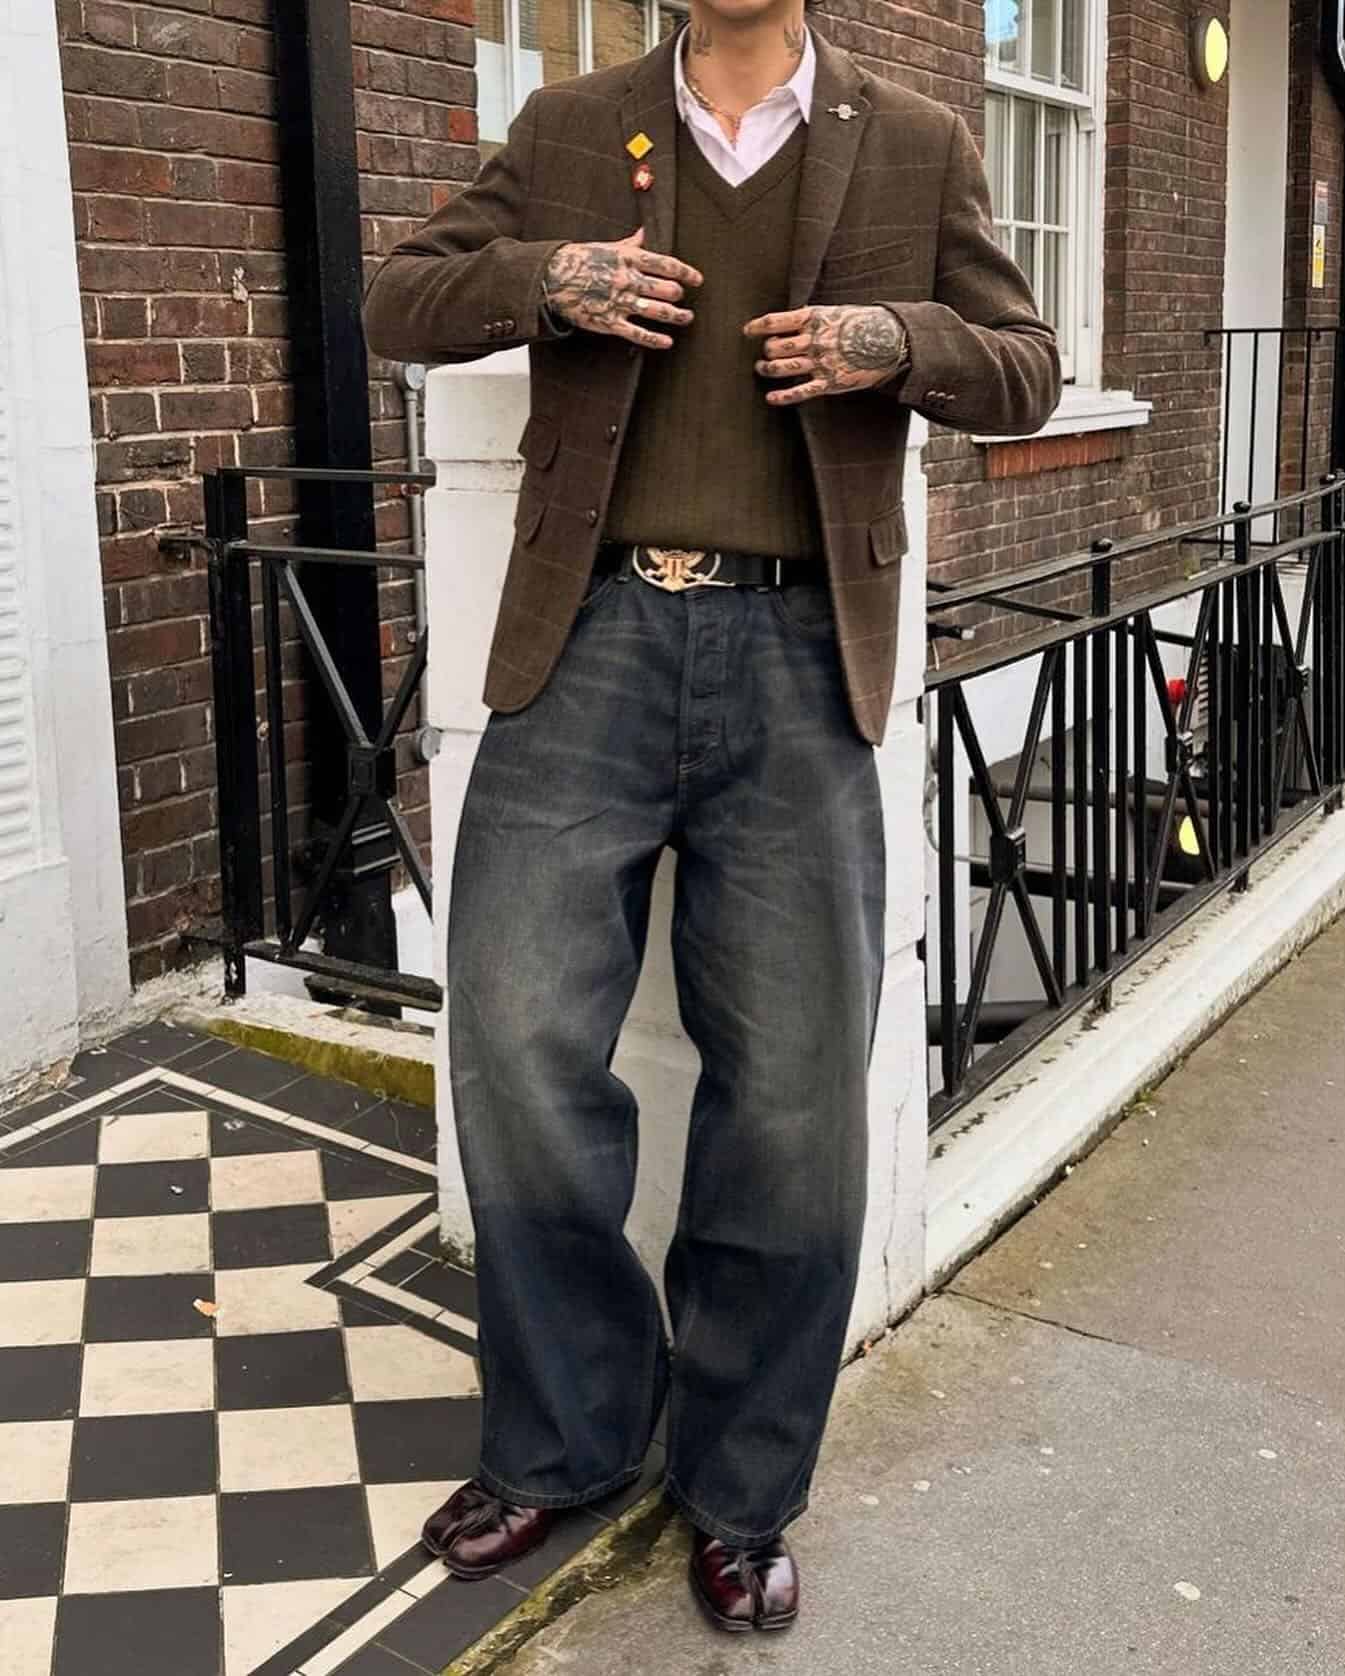 Vintage aesthetic: man wearing a brown checked blazer and wide legged jeans